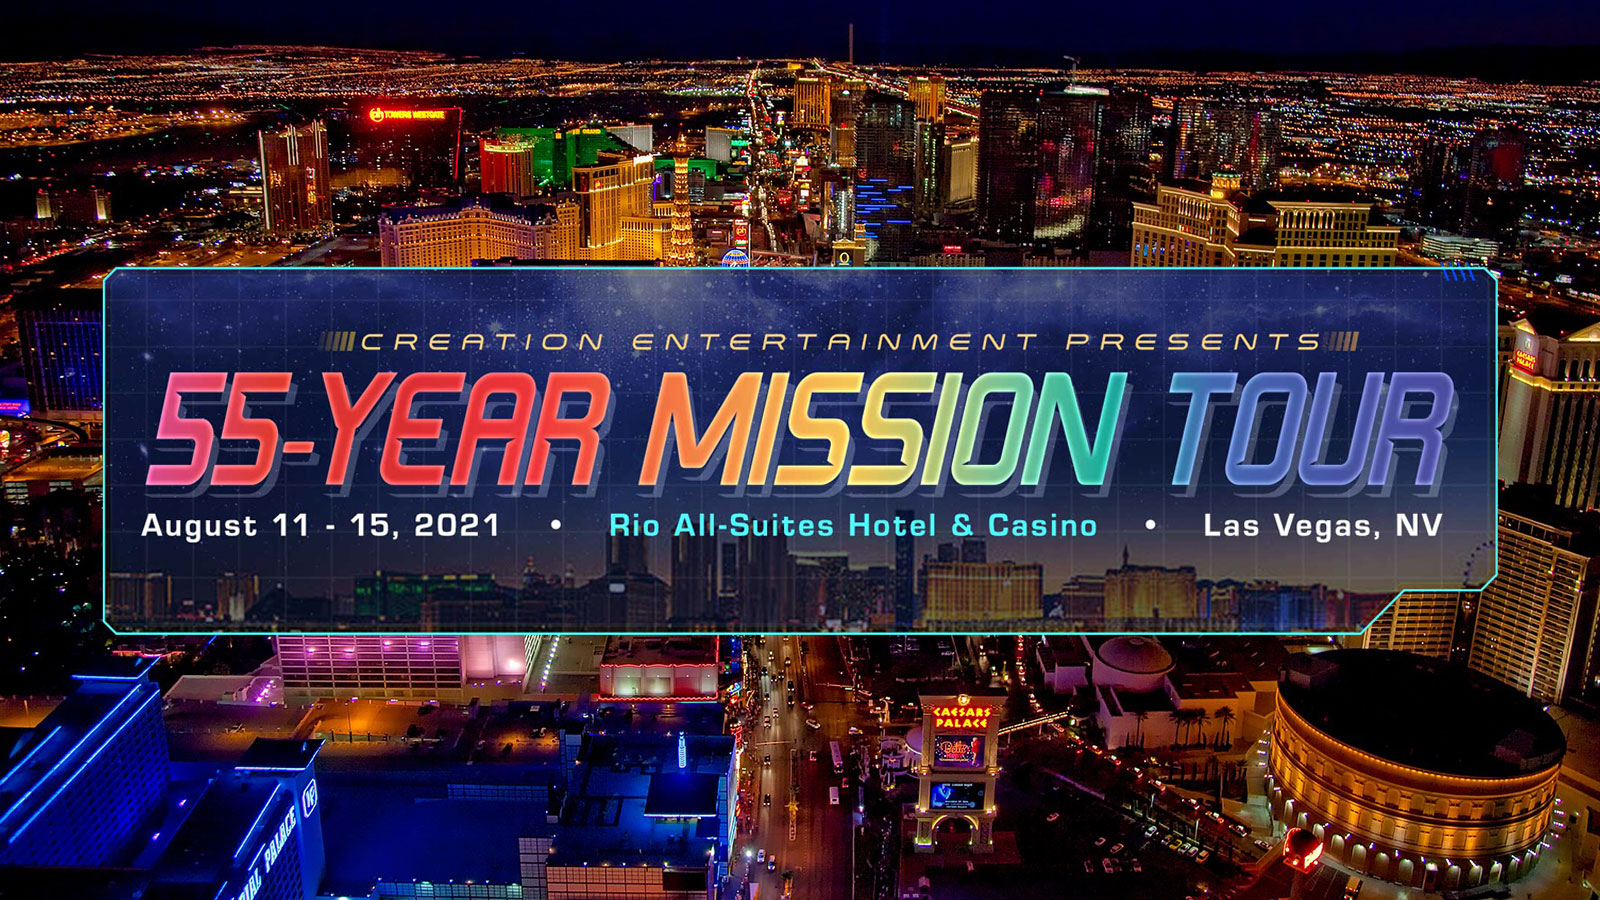 More Than 85 Star Trek Guests Revealed For ’55 Year Mission’ Convention In Las Vegas Next August